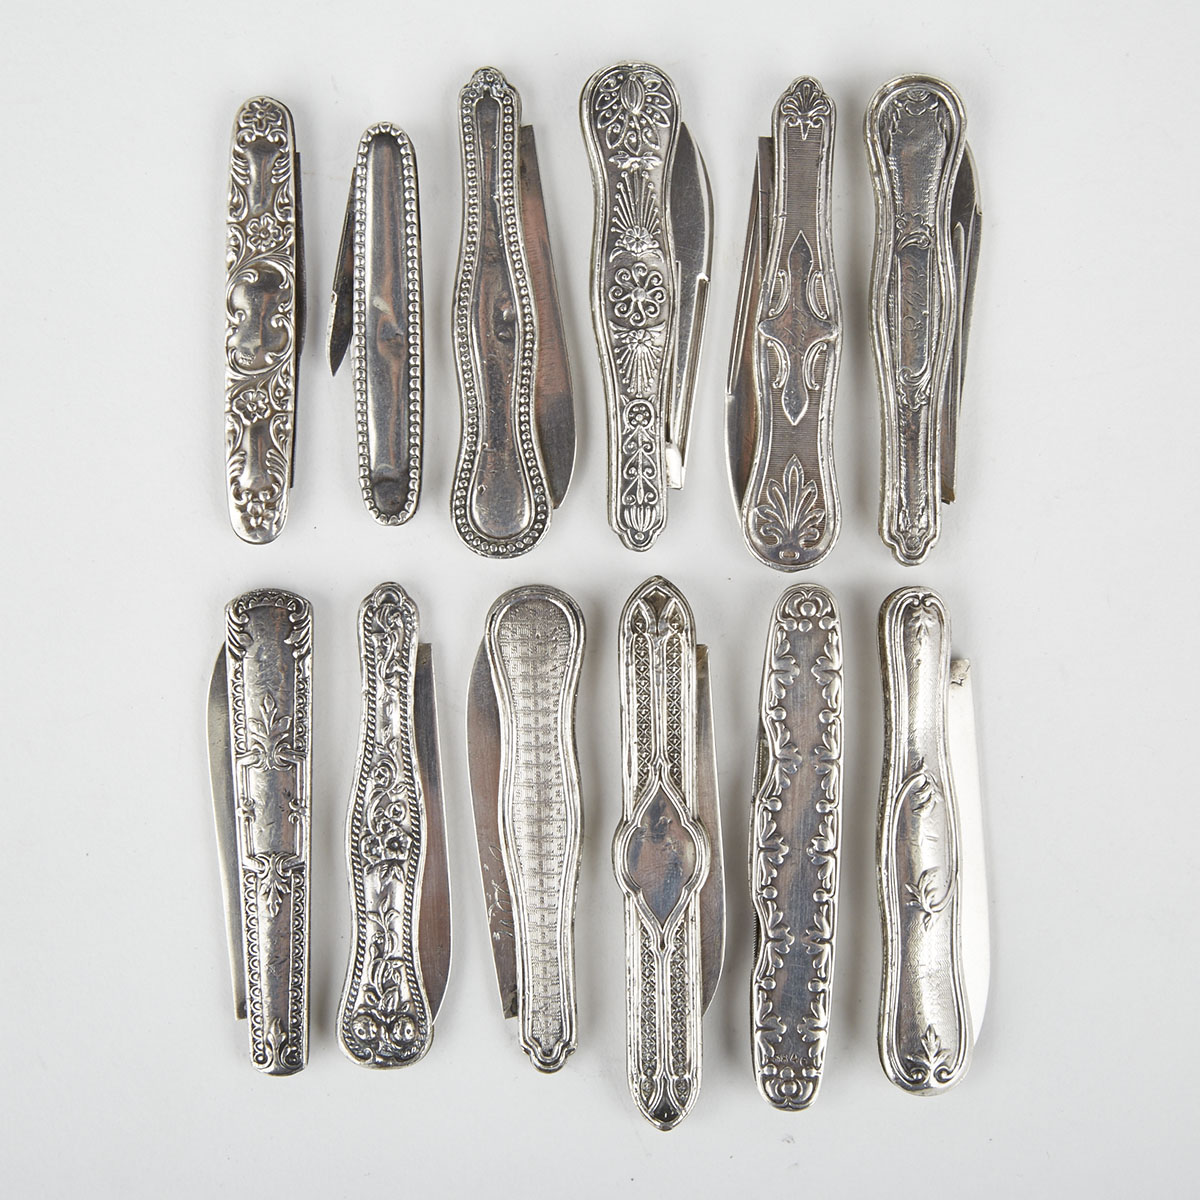 Twelve Mainly American Silver Pocket Knives, late 19th century